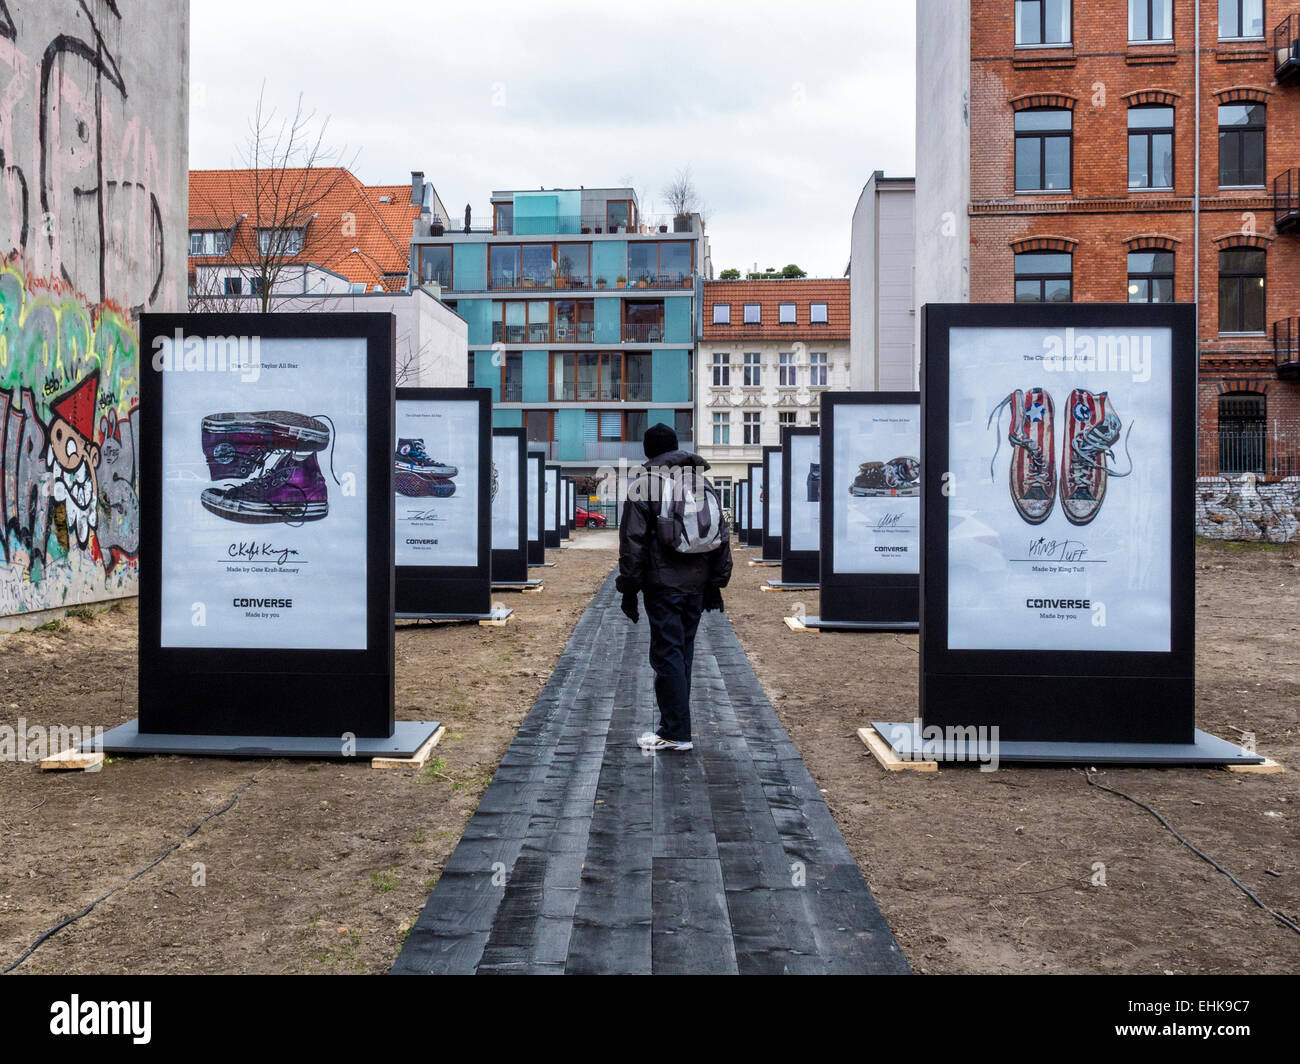 Berlin Converse Trainers Advertisement, Chucks shoes "made for you"  campaign, senior man walking on catwalk Stock Photo - Alamy